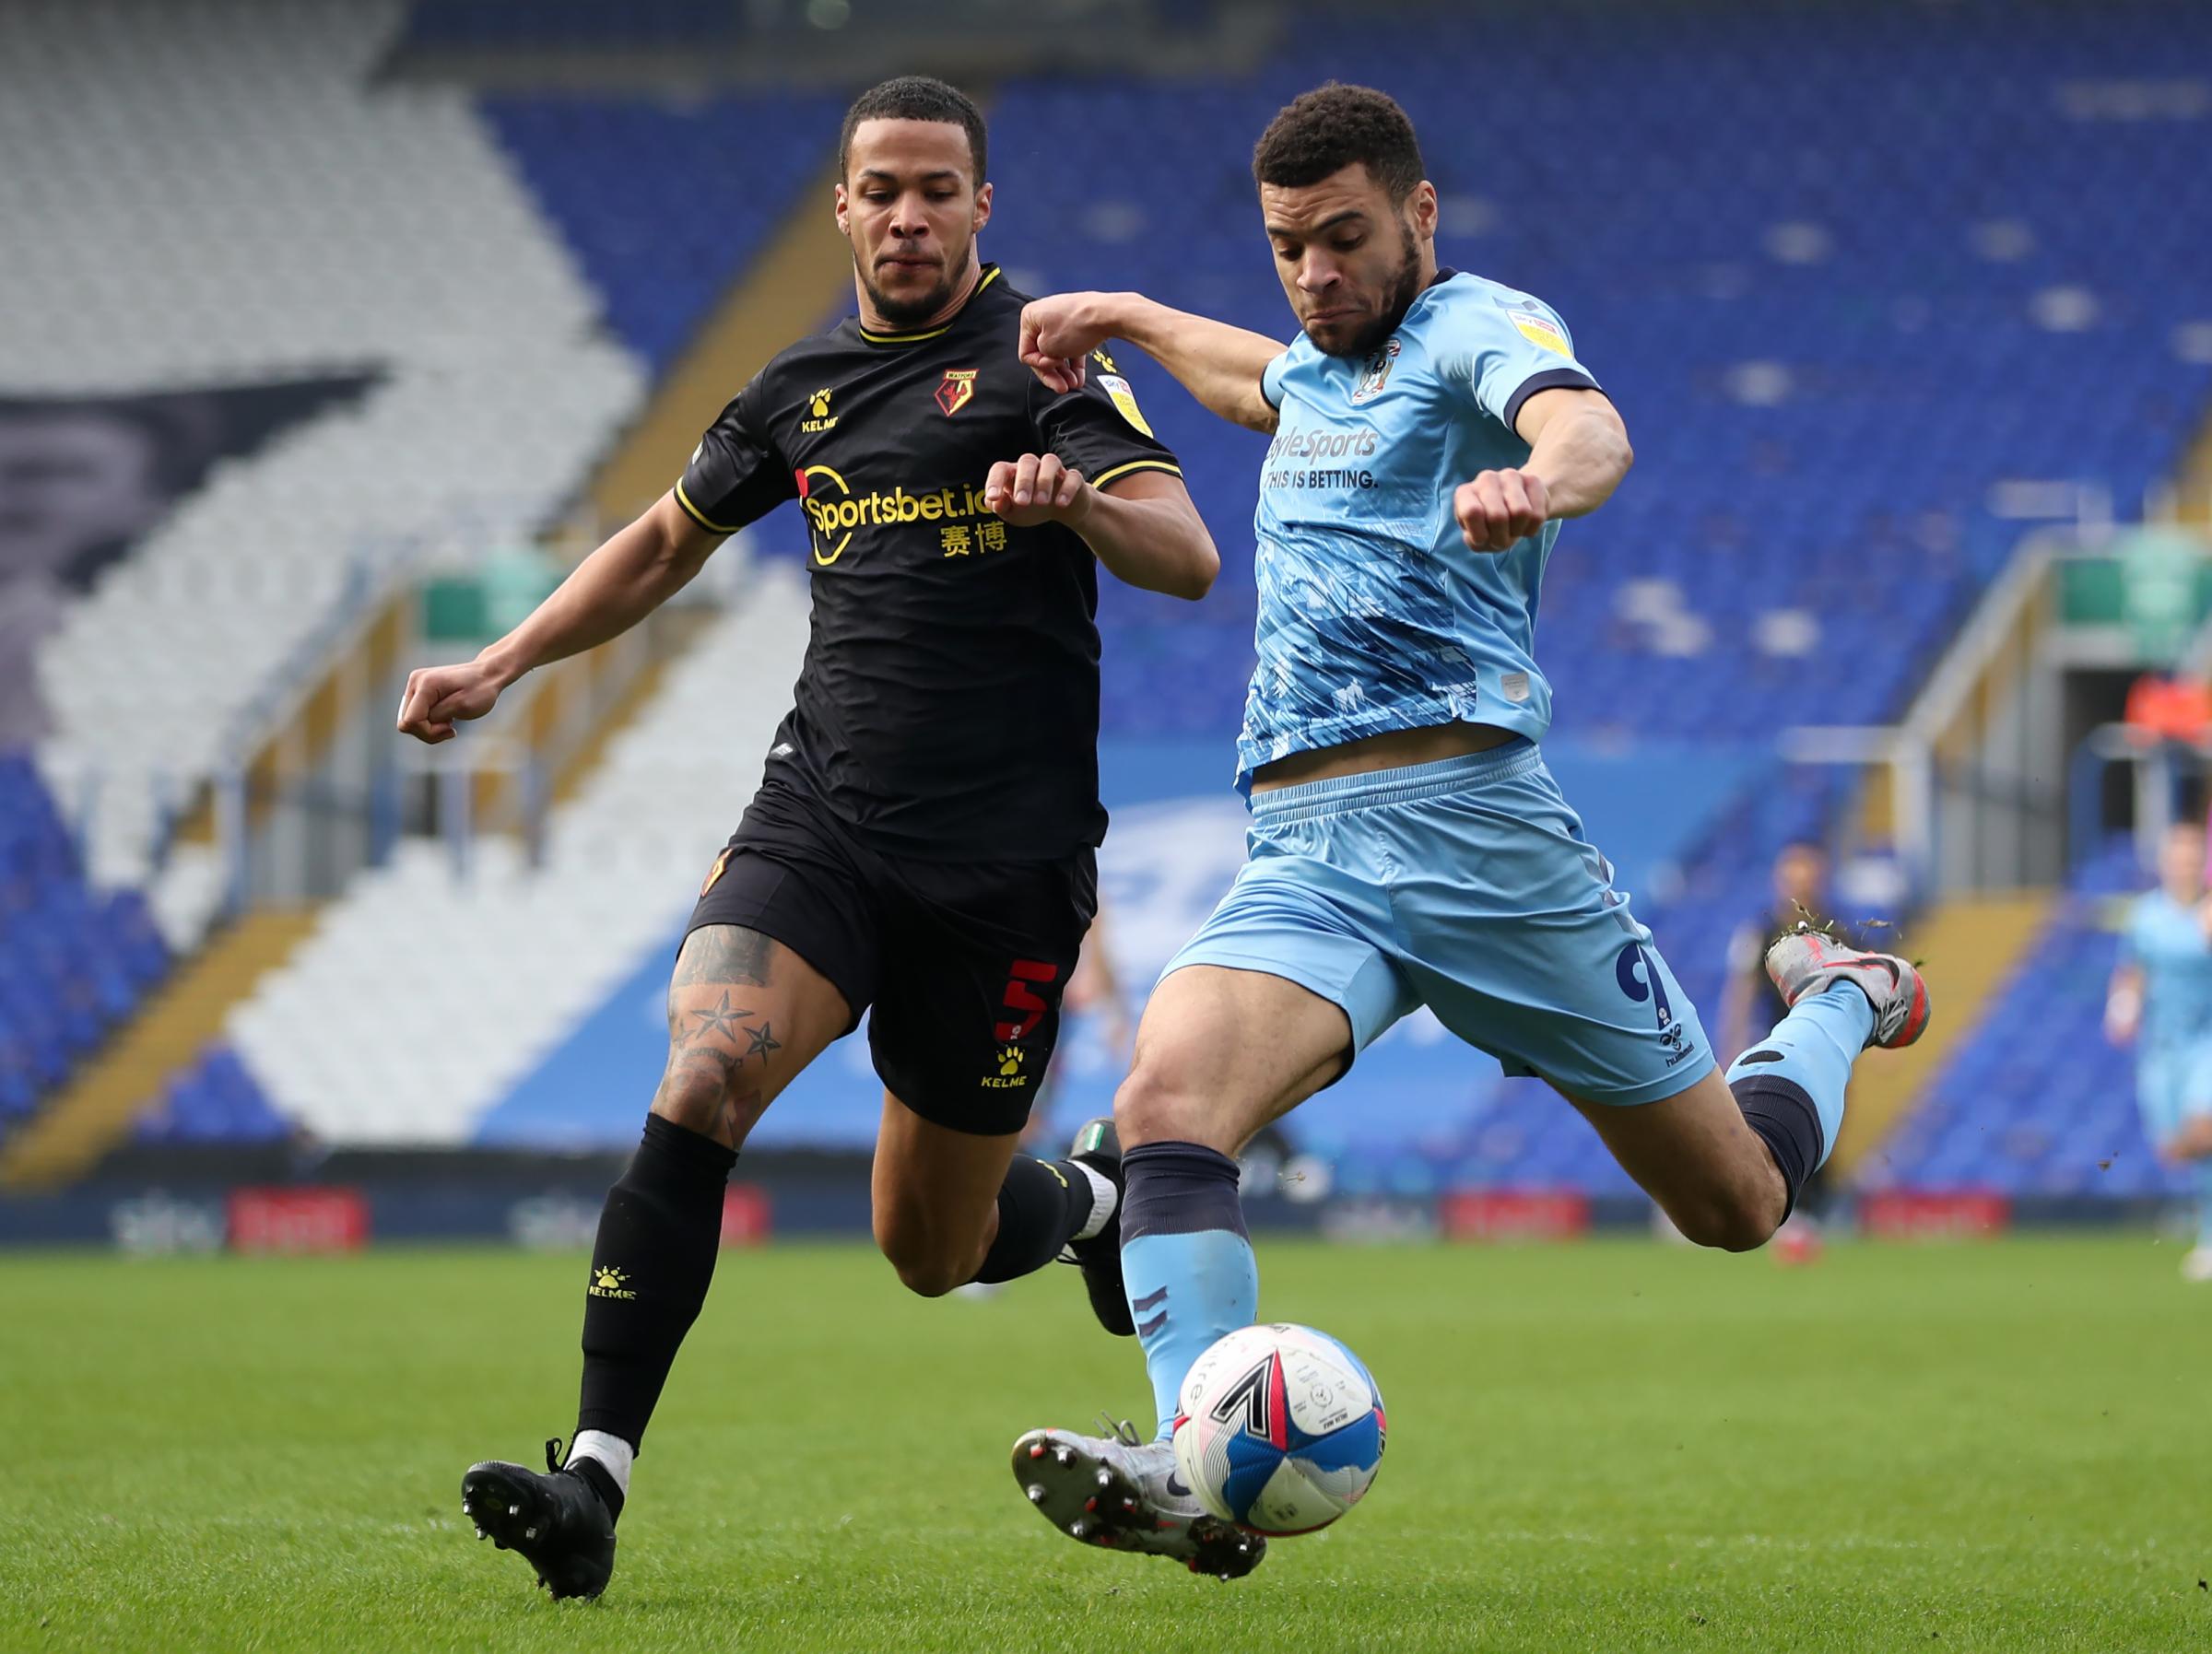 Watford game against Coventry City ends goalless